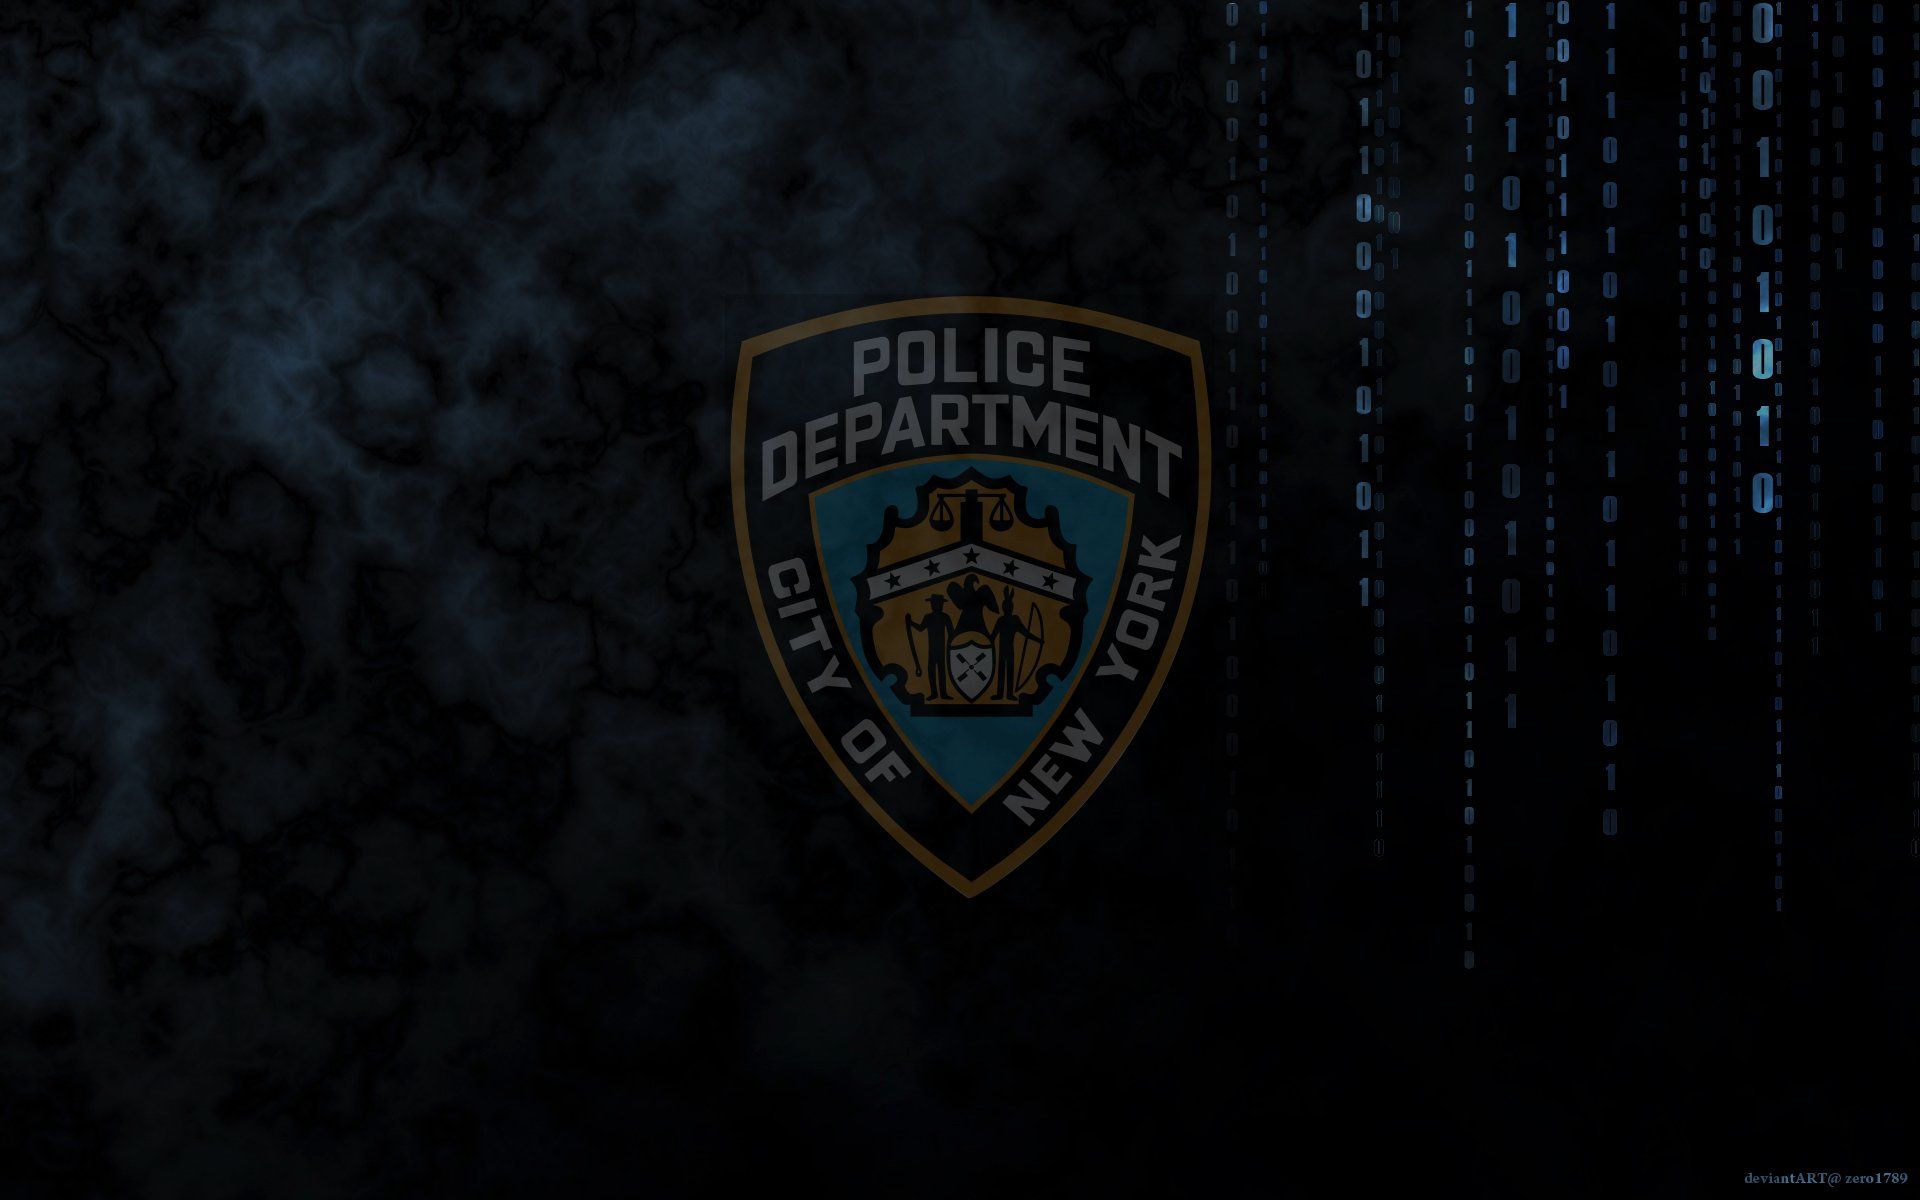 NYPD Wallpaper. NYPD Wallpaper, NYPD